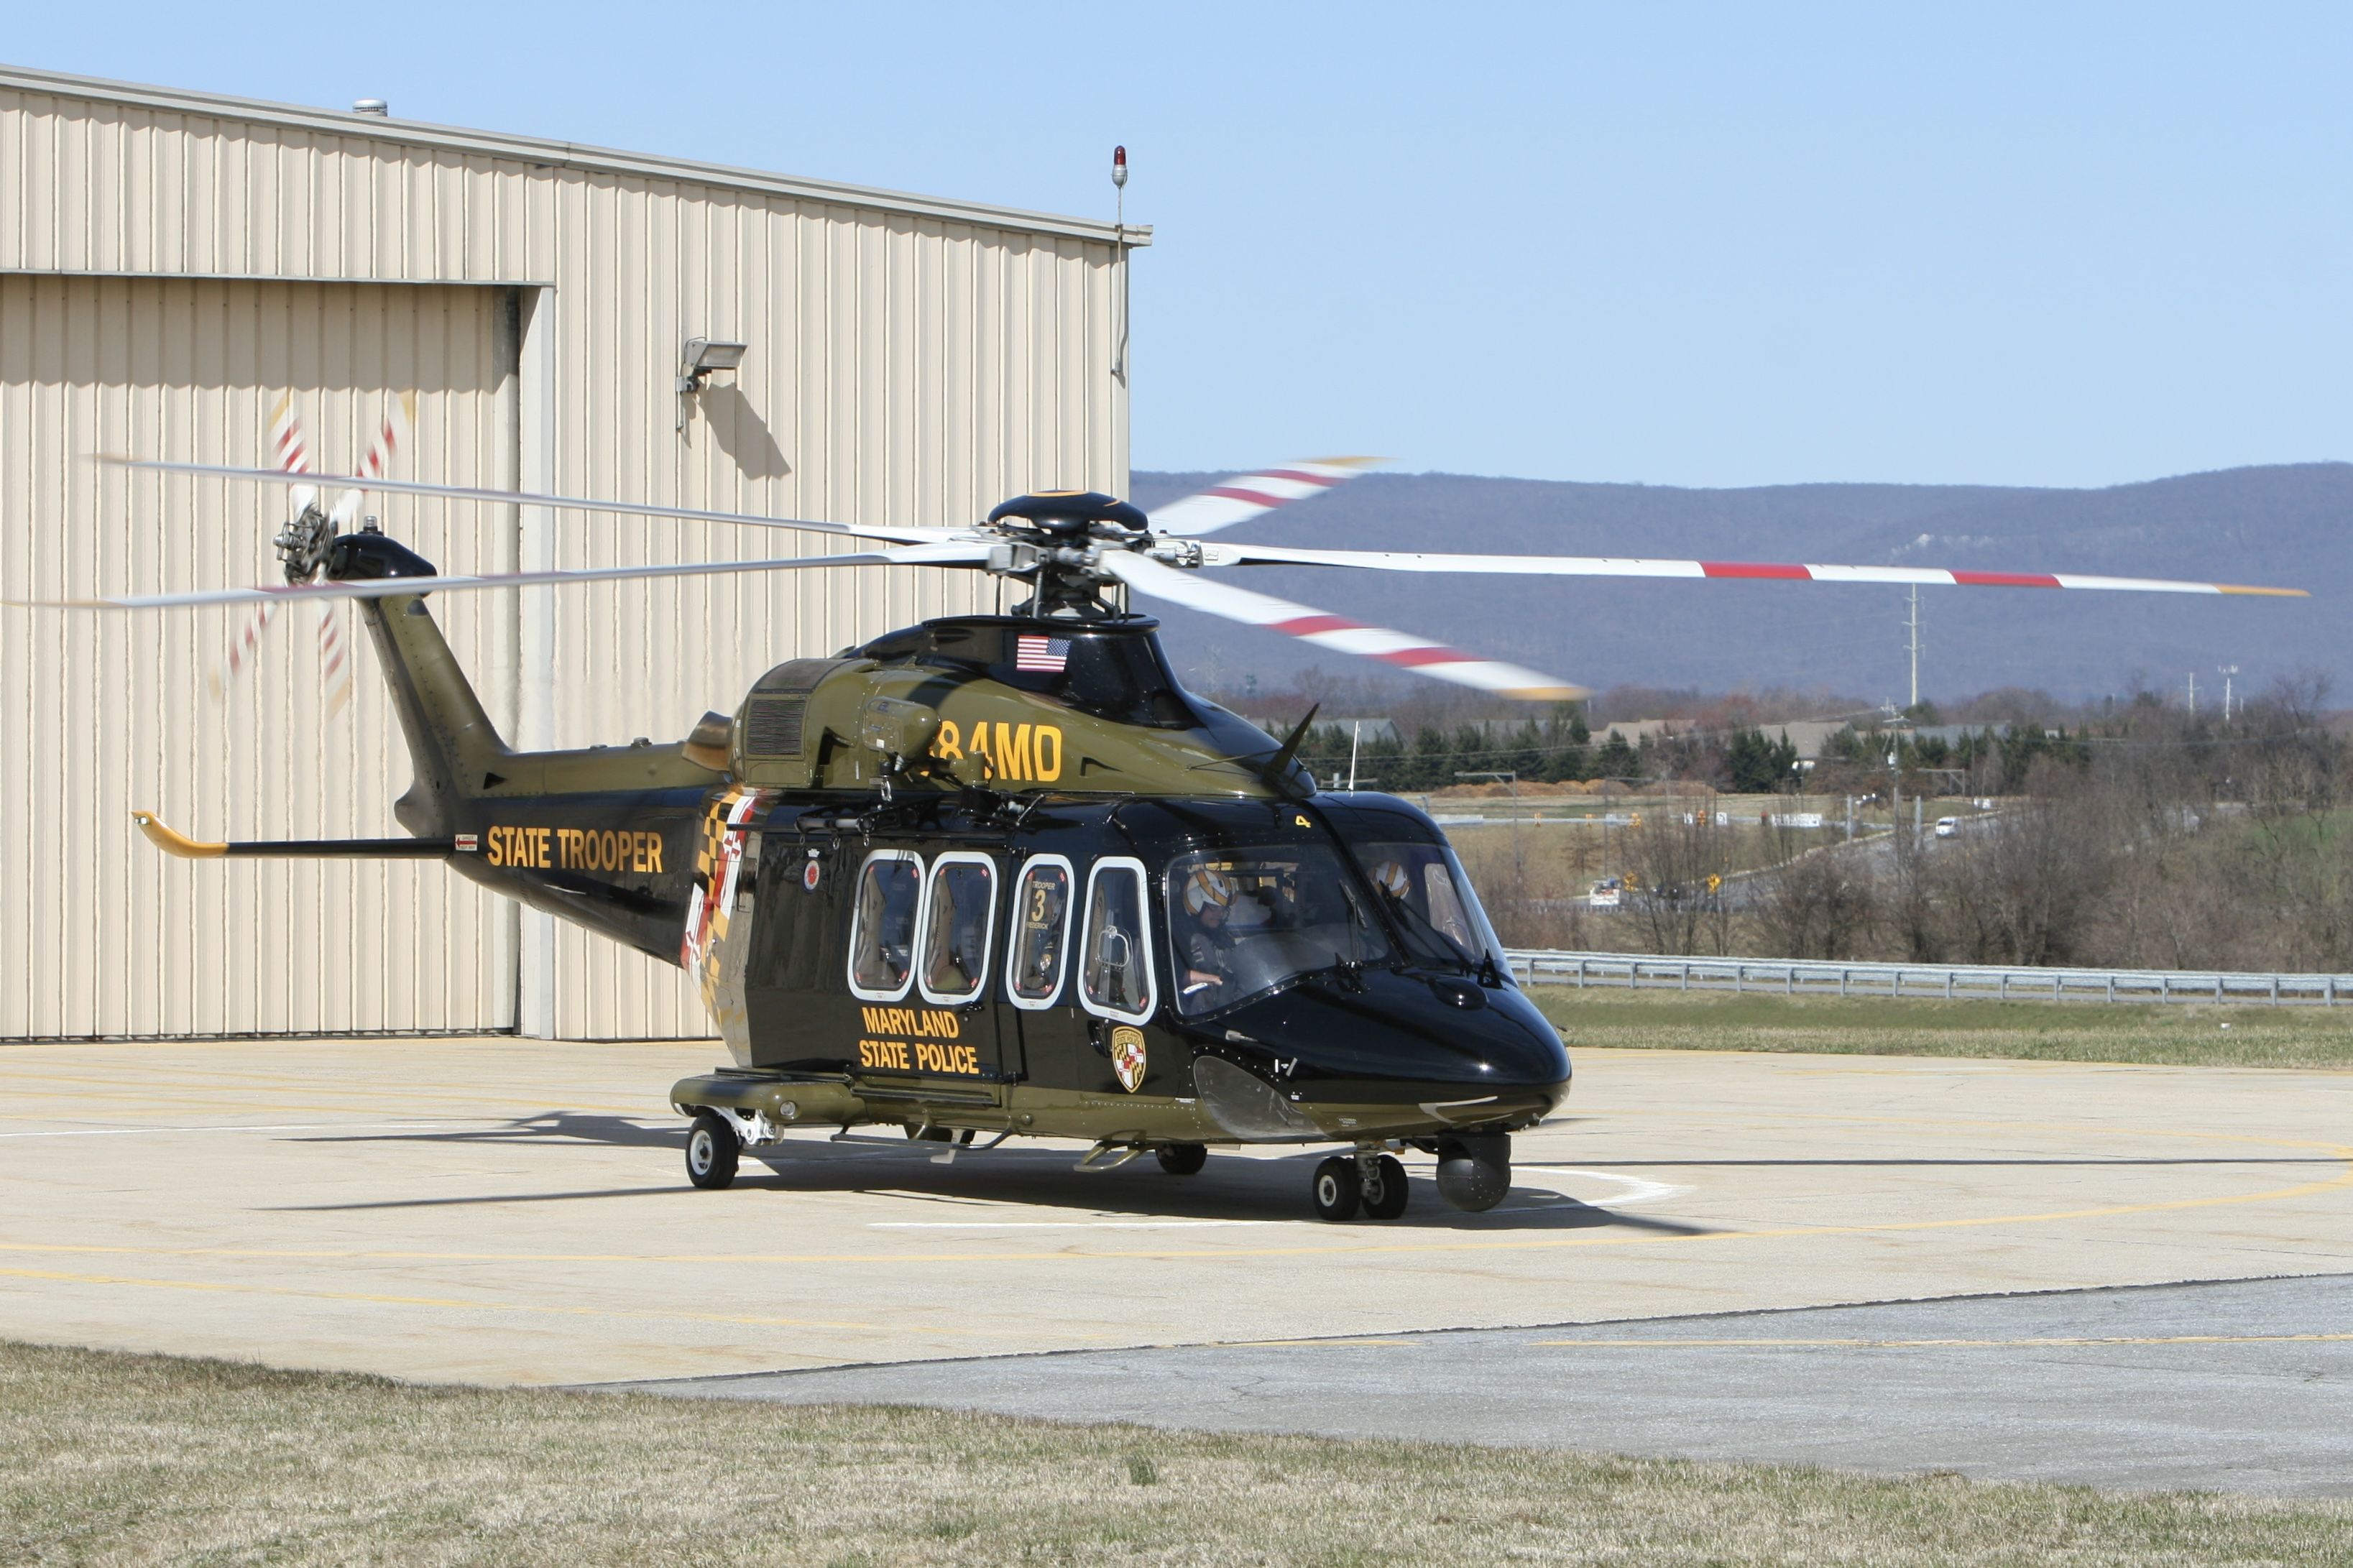 BELL-AGUSTA AB-139 (N384MD) - March 19, 2021 - parks in front of hangar 